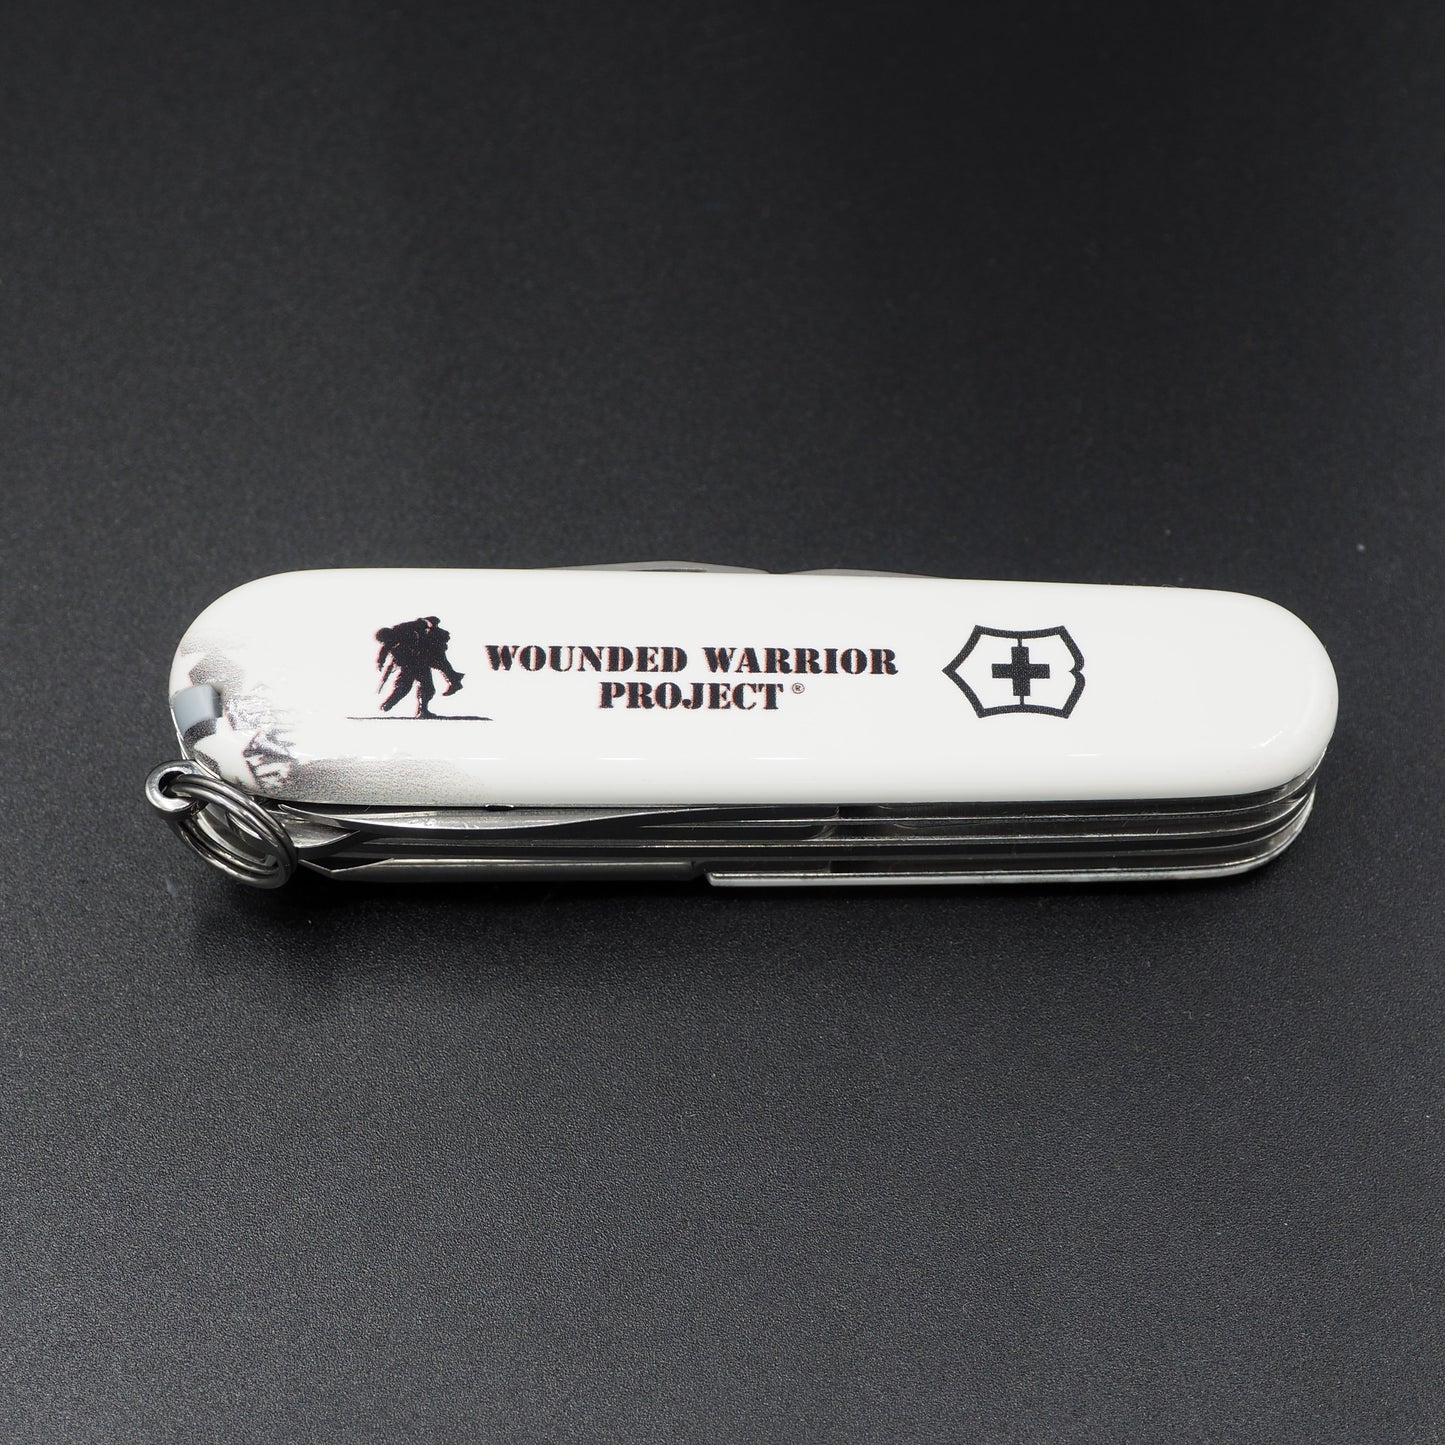 Victorinox WWP Fieldmaster (Wounded Warrior Project)